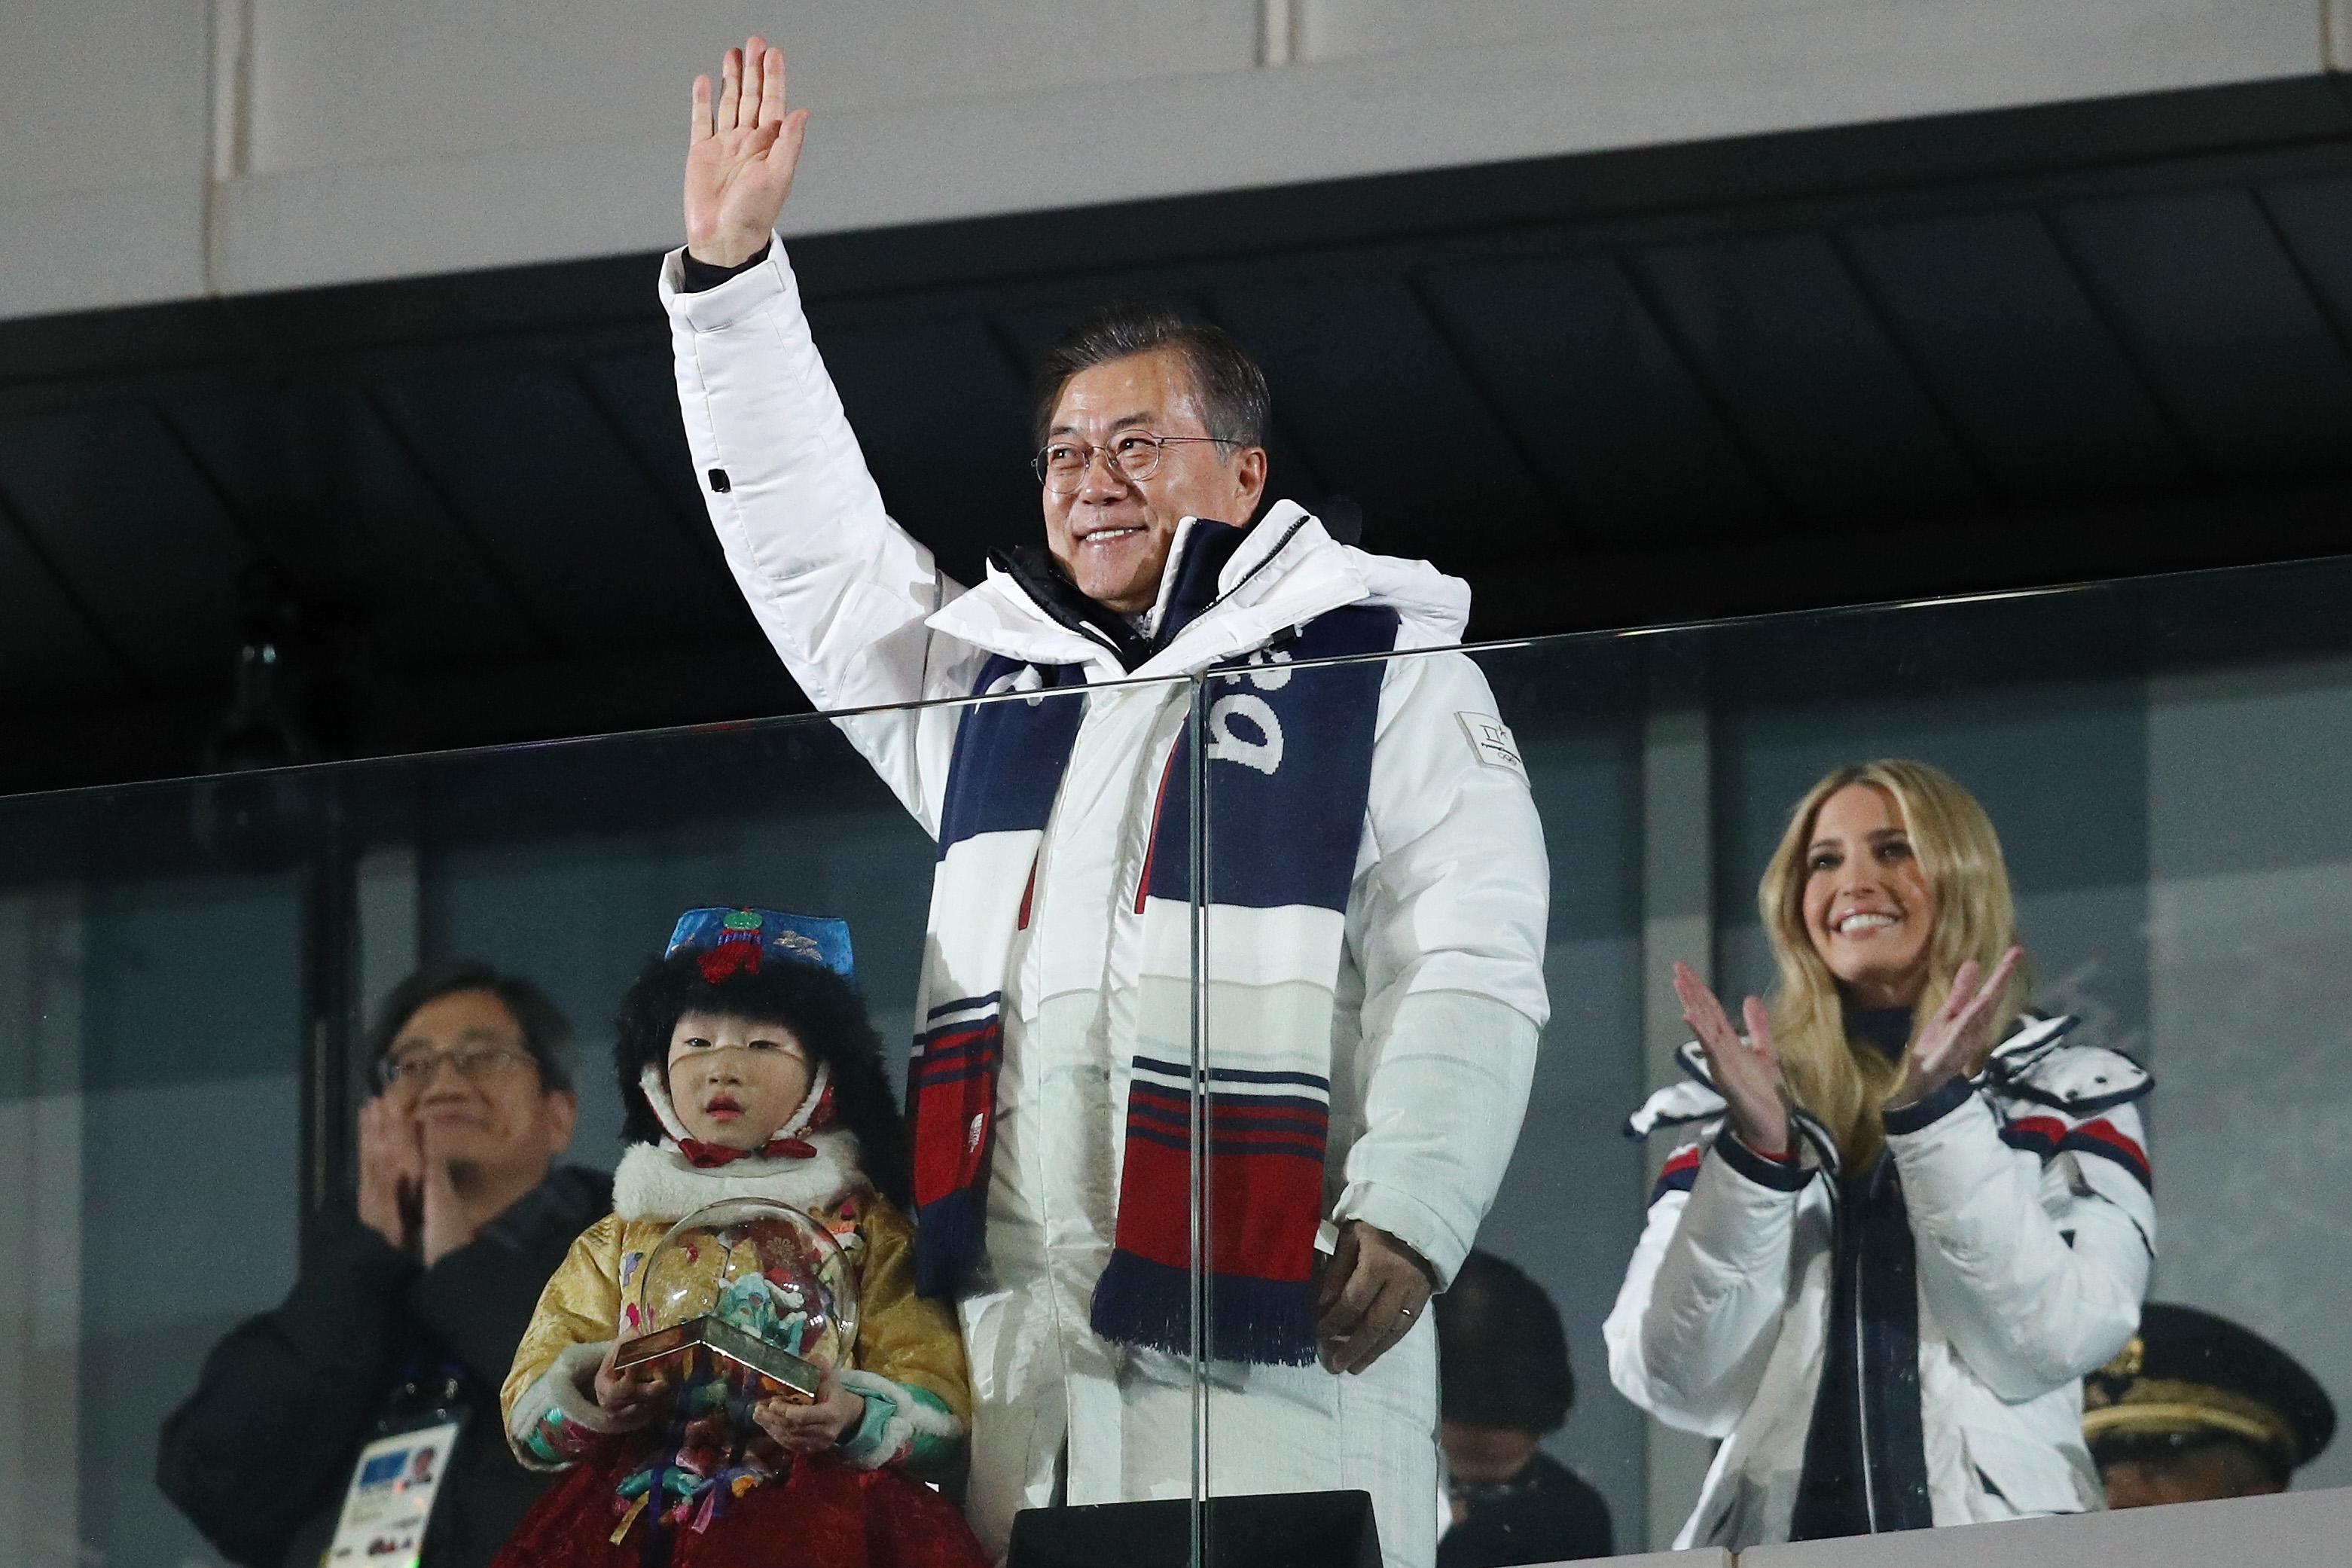 President Moon Jae-in of South Korea attends the Closing Ceremony of the PyeongChang 2018 Winter Olympic Games.